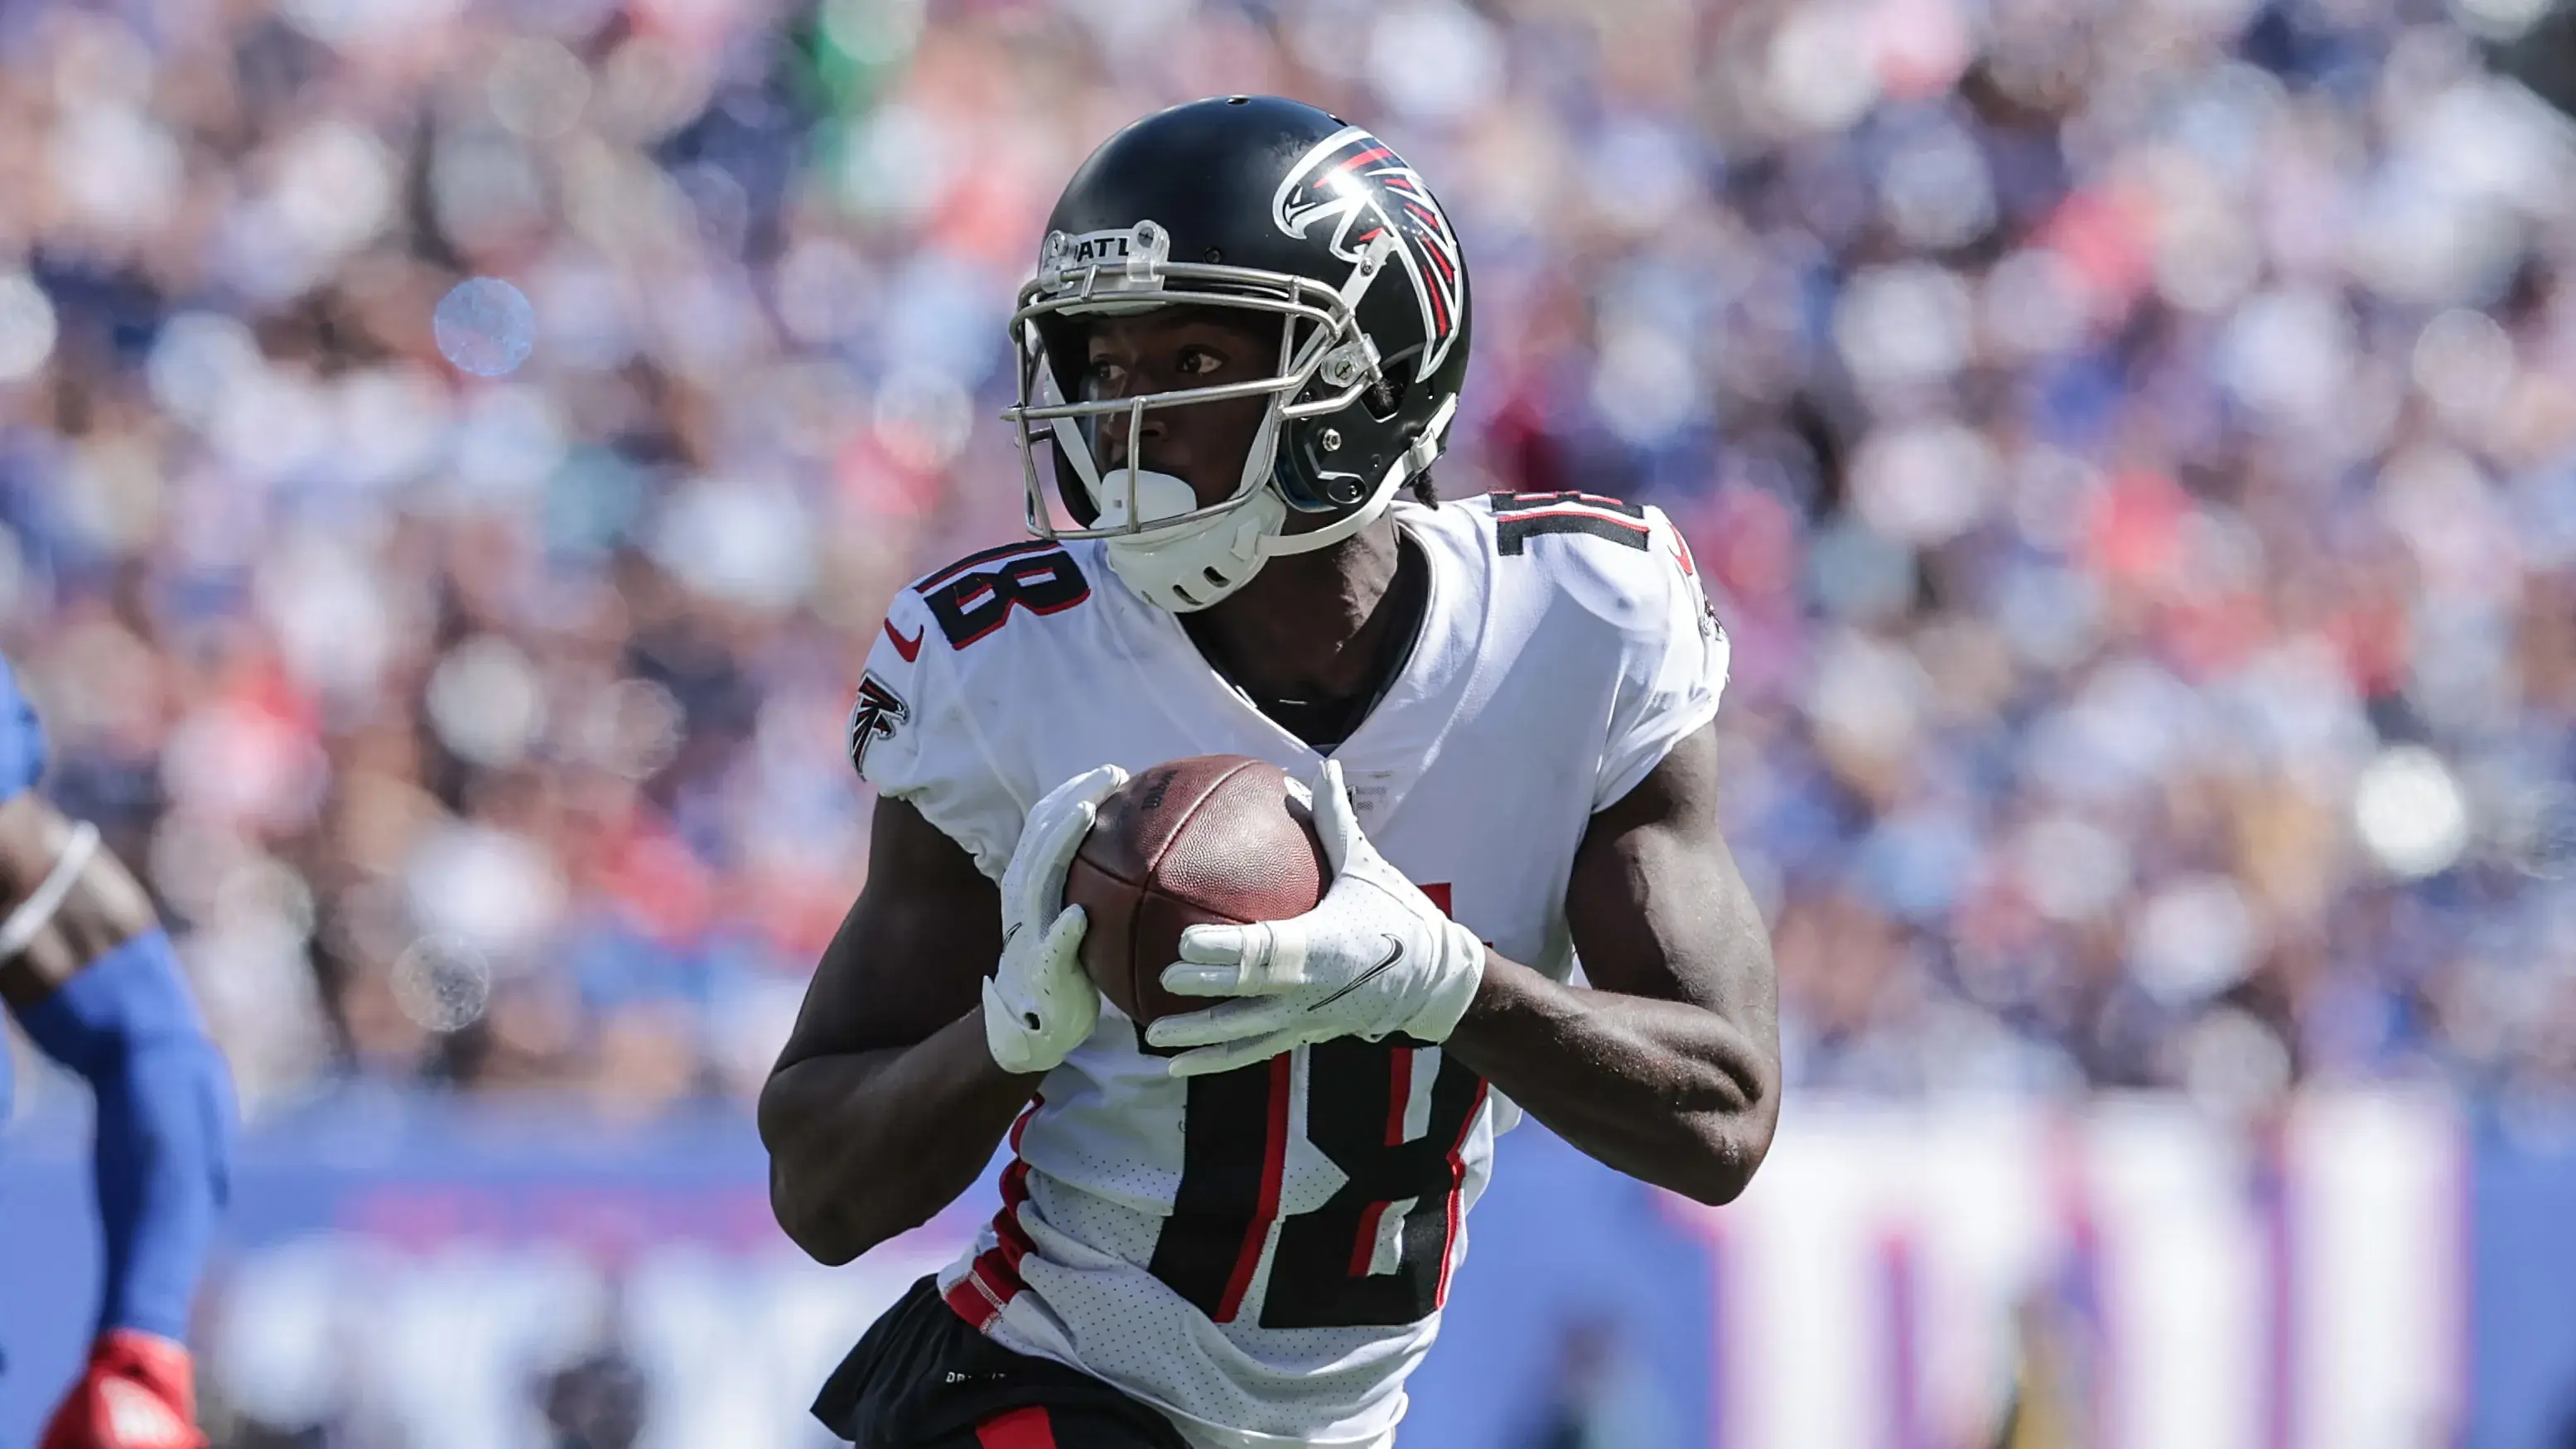 Sep 26, 2021; East Rutherford, New Jersey, USA; Atlanta Falcons wide receiver Calvin Ridley (18) carries the ball past New York Giants free safety Jabrill Peppers (21) during the first quarter at MetLife Stadium. Mandatory Credit: Vincent Carchietta-USA TODAY Sports / © Vincent Carchietta-USA TODAY Sports